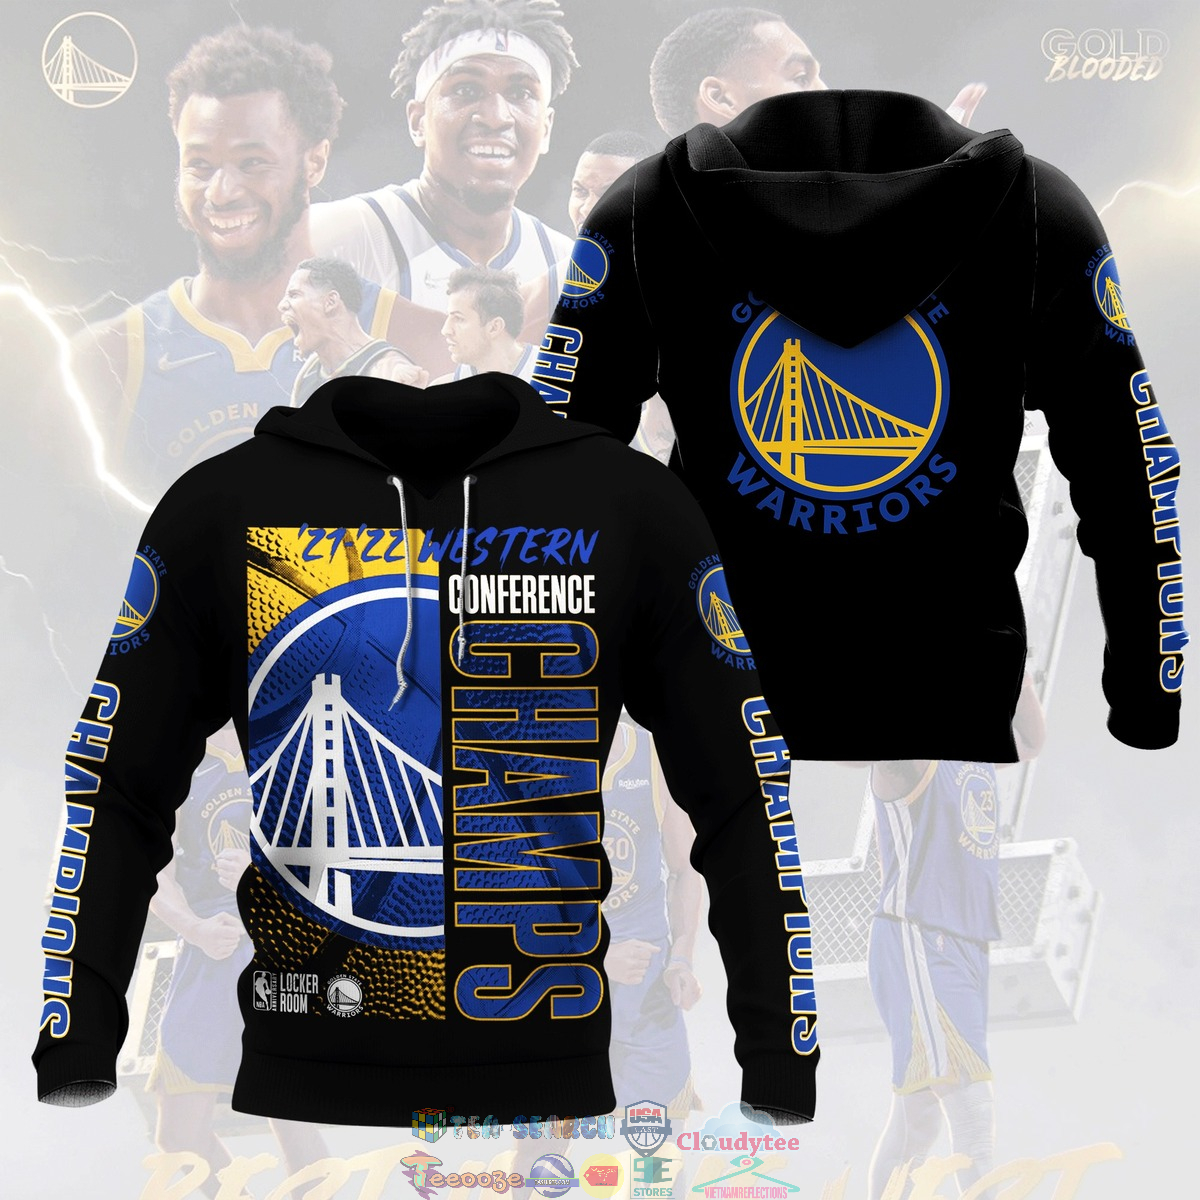 Golden State Warriors 21-22 Conference Champs Black 3D hoodie and t-shirt – Saleoff